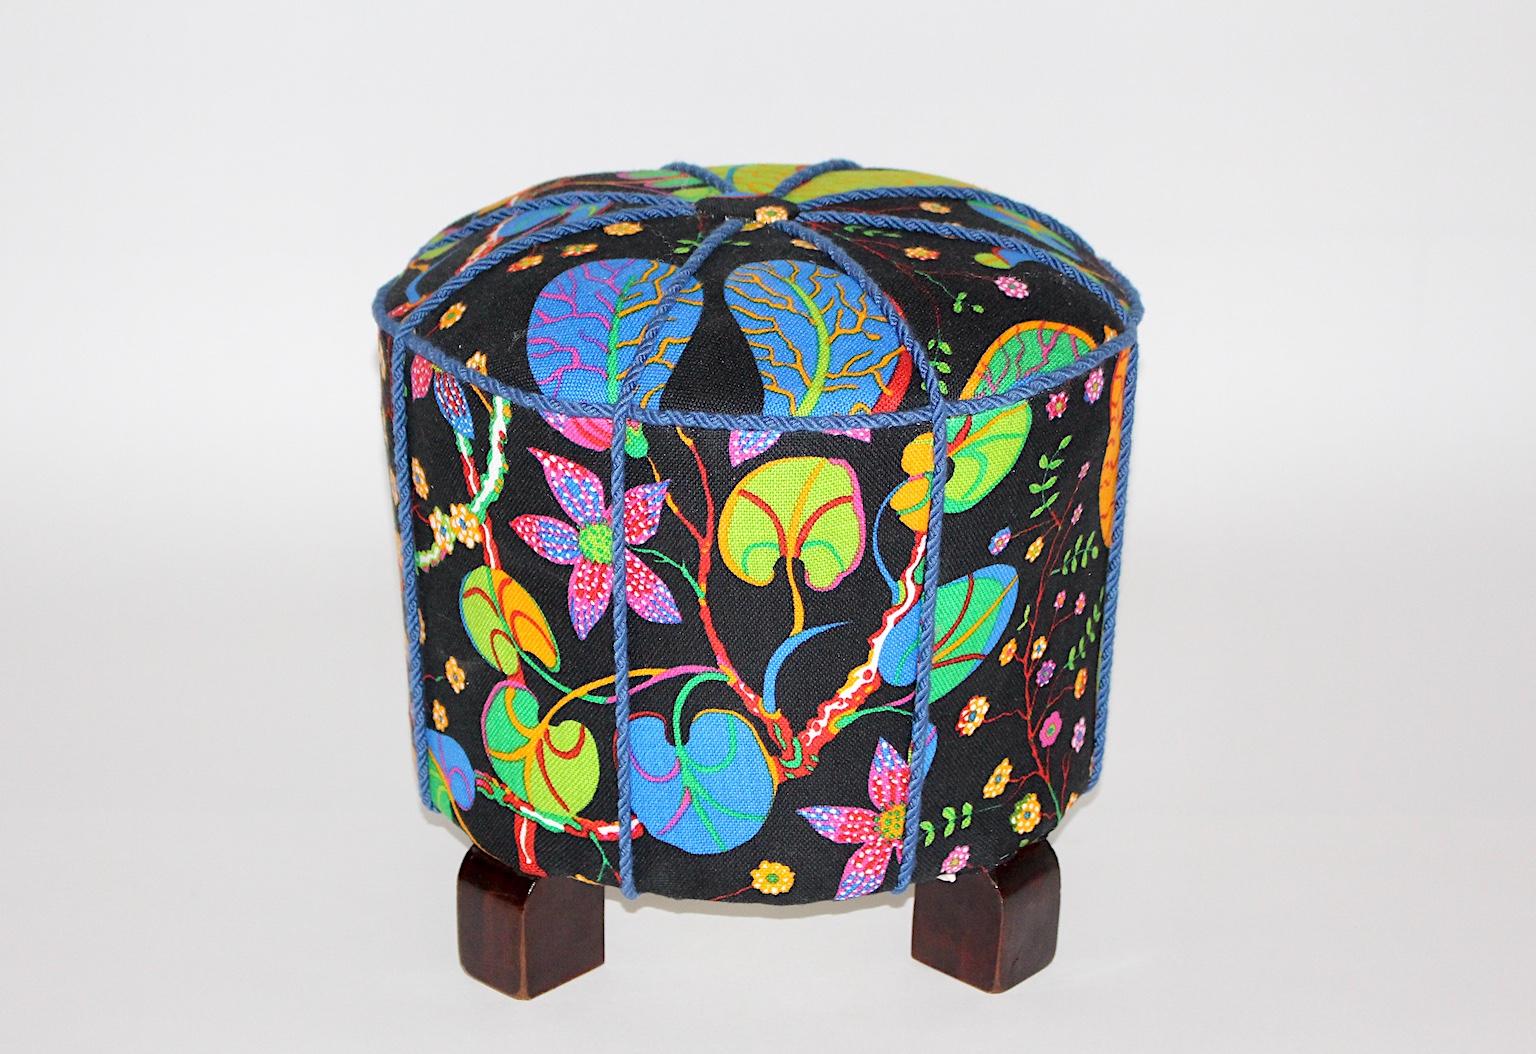 Art Deco Vintage Beech Pouf or Stool with Josef Frank Fabric, 1930s, Austria In Good Condition For Sale In Vienna, AT